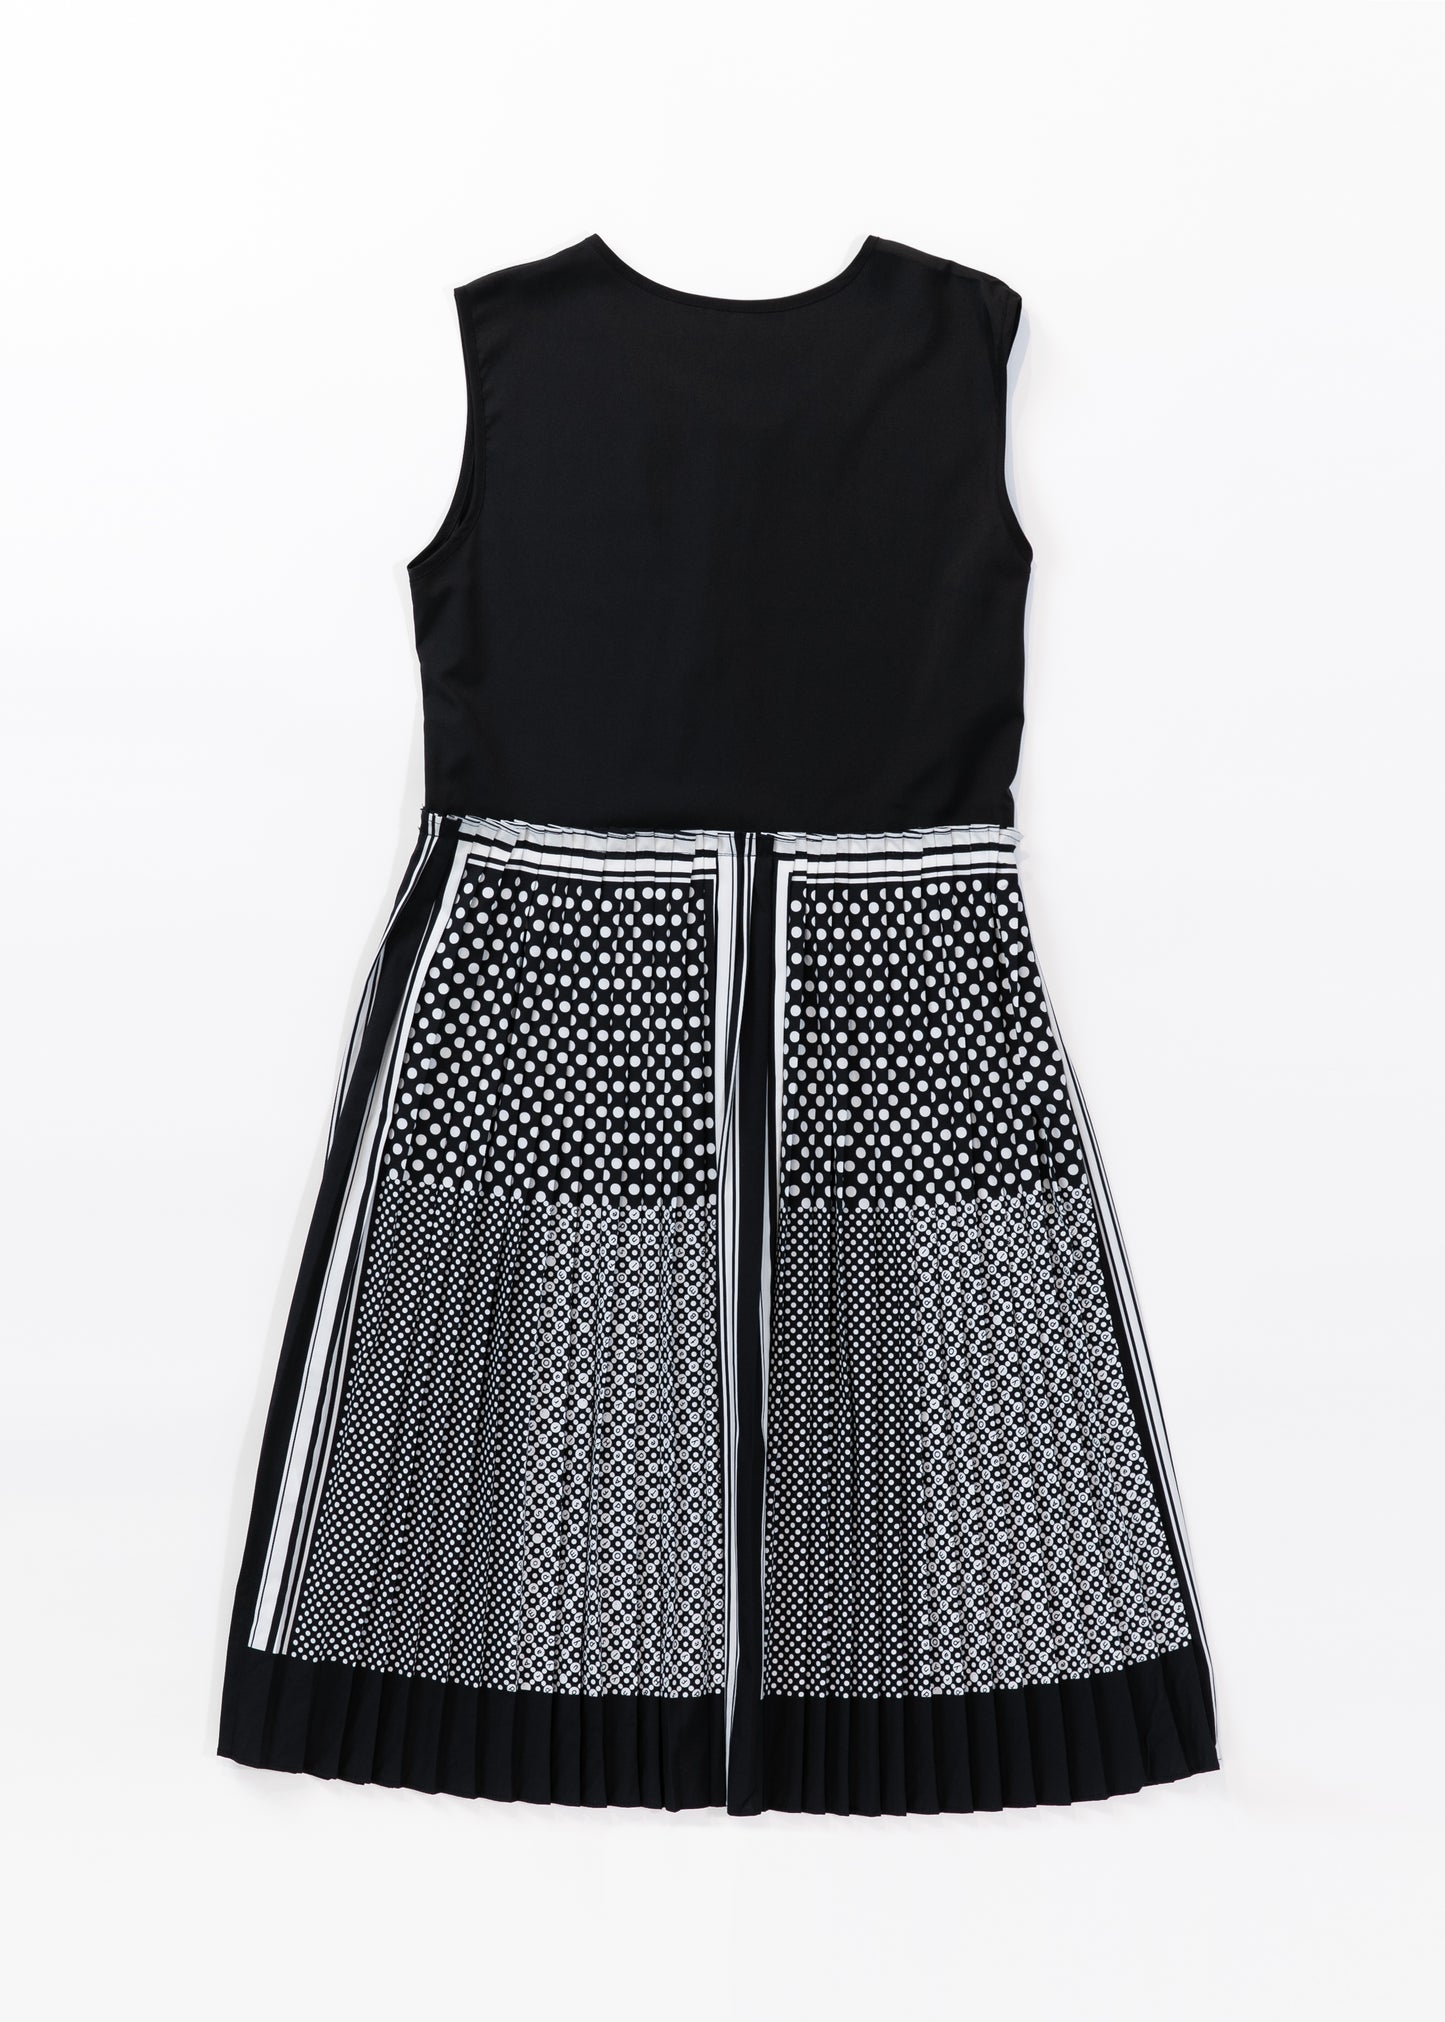 Pintuck pleated dress with different dots design